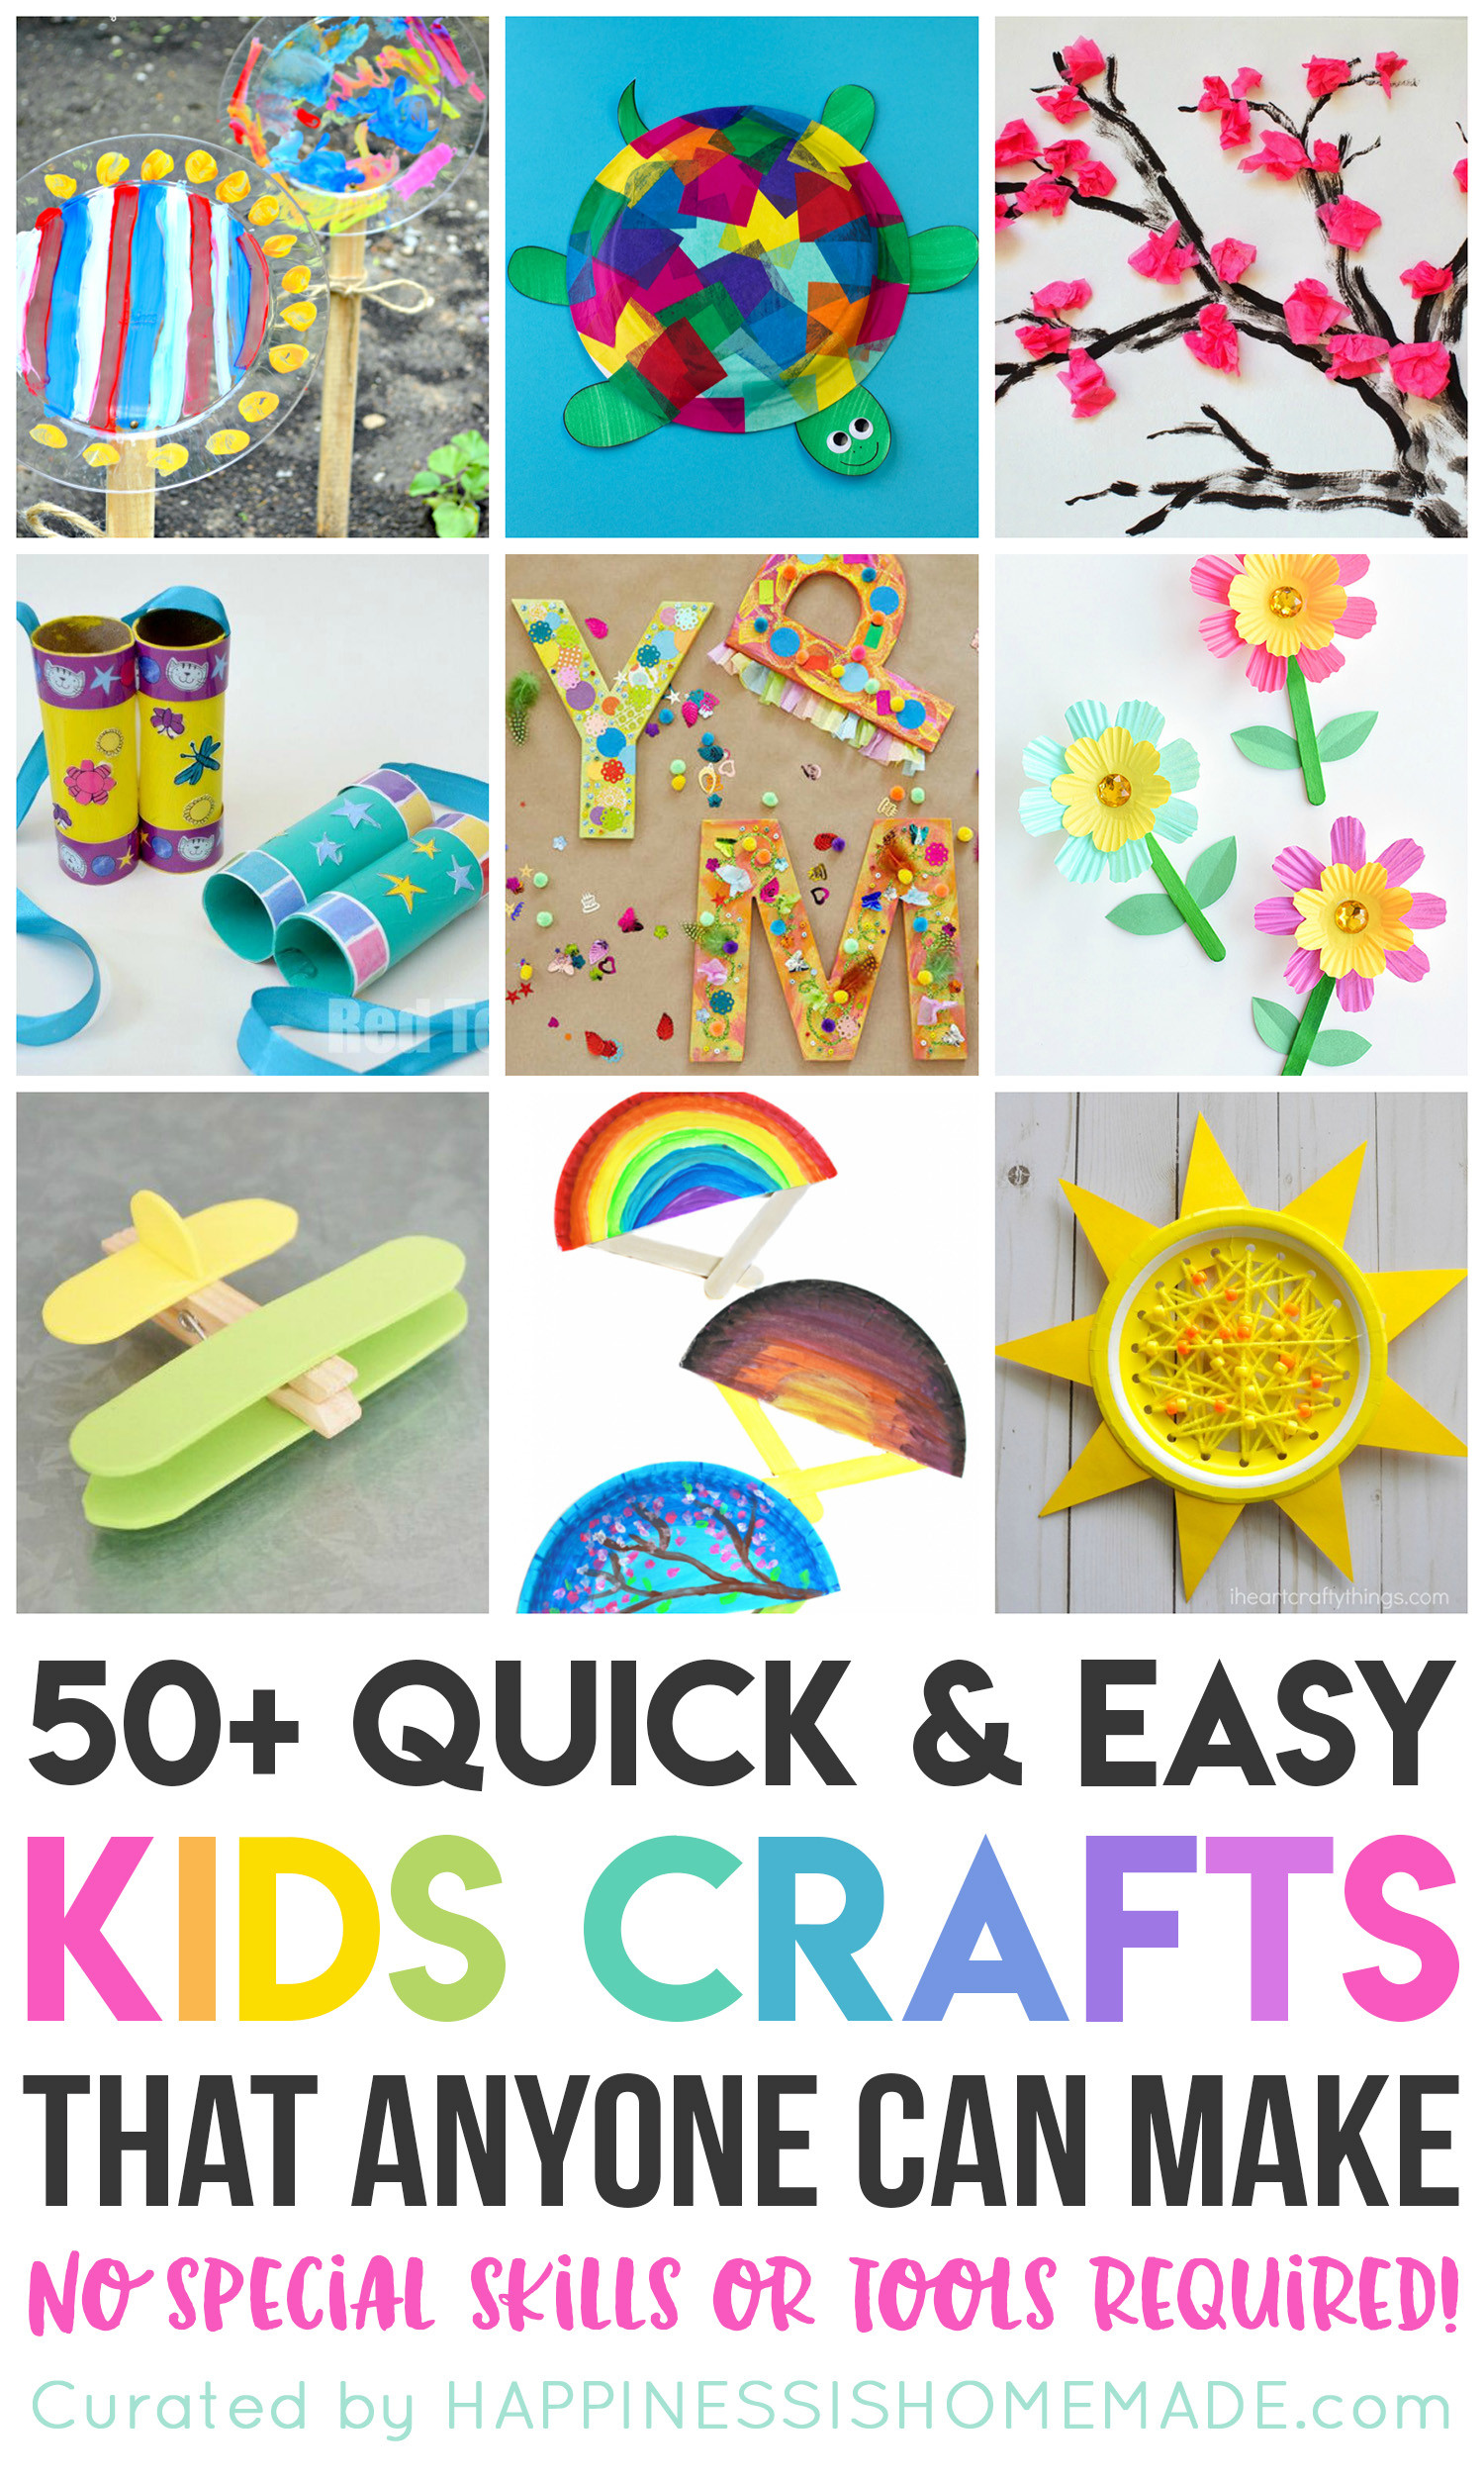 Crafts For Kids At Home
 50 Quick & Easy Kids Crafts that ANYONE Can Make